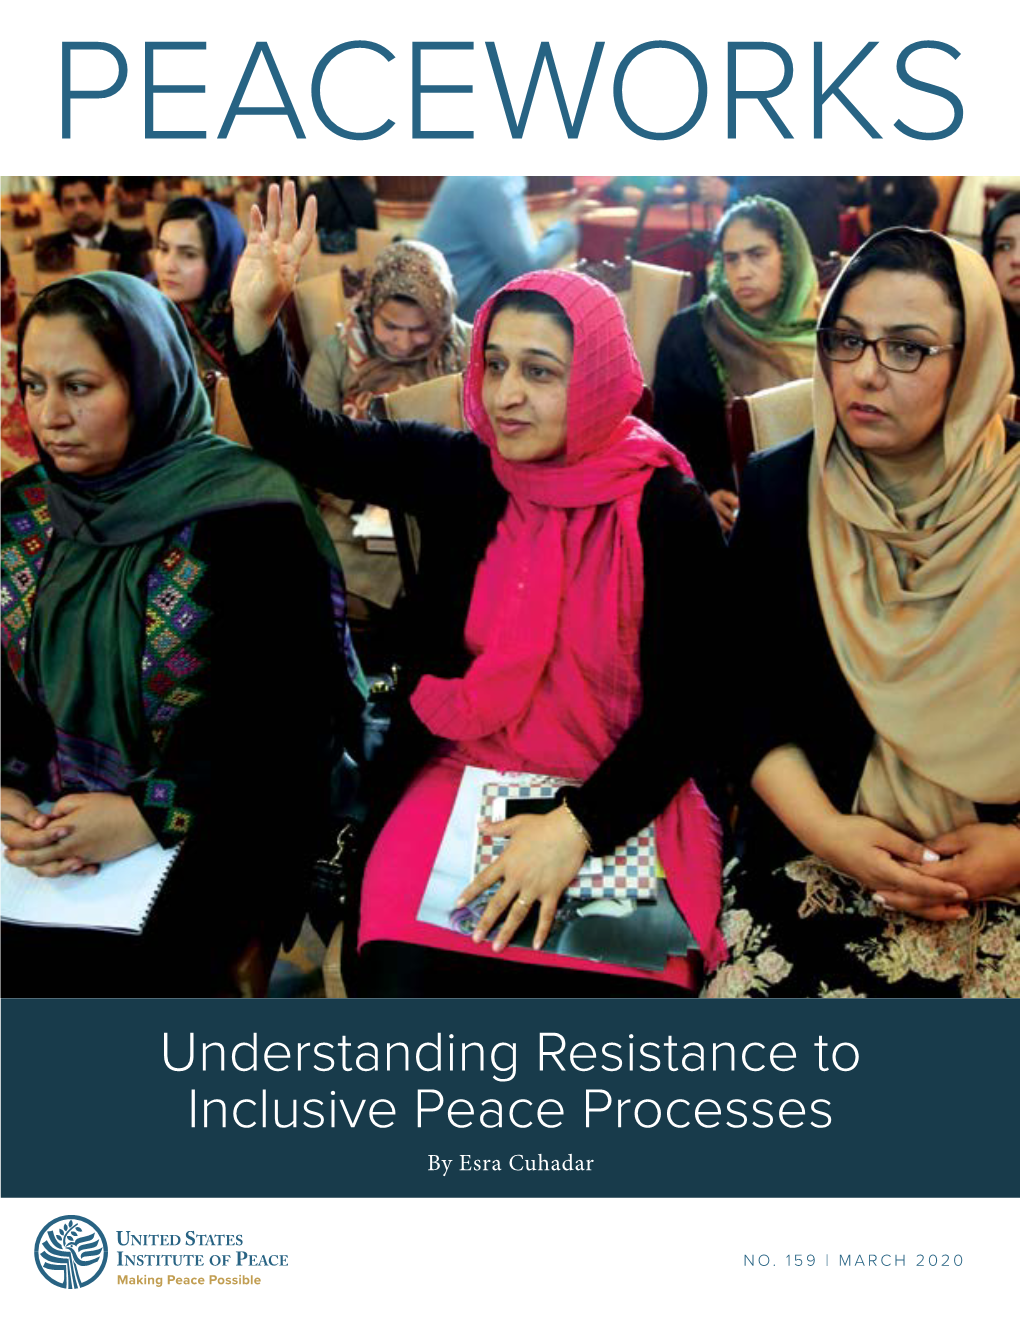 Understanding Resistance to Inclusive Peace Processes by Esra Cuhadar